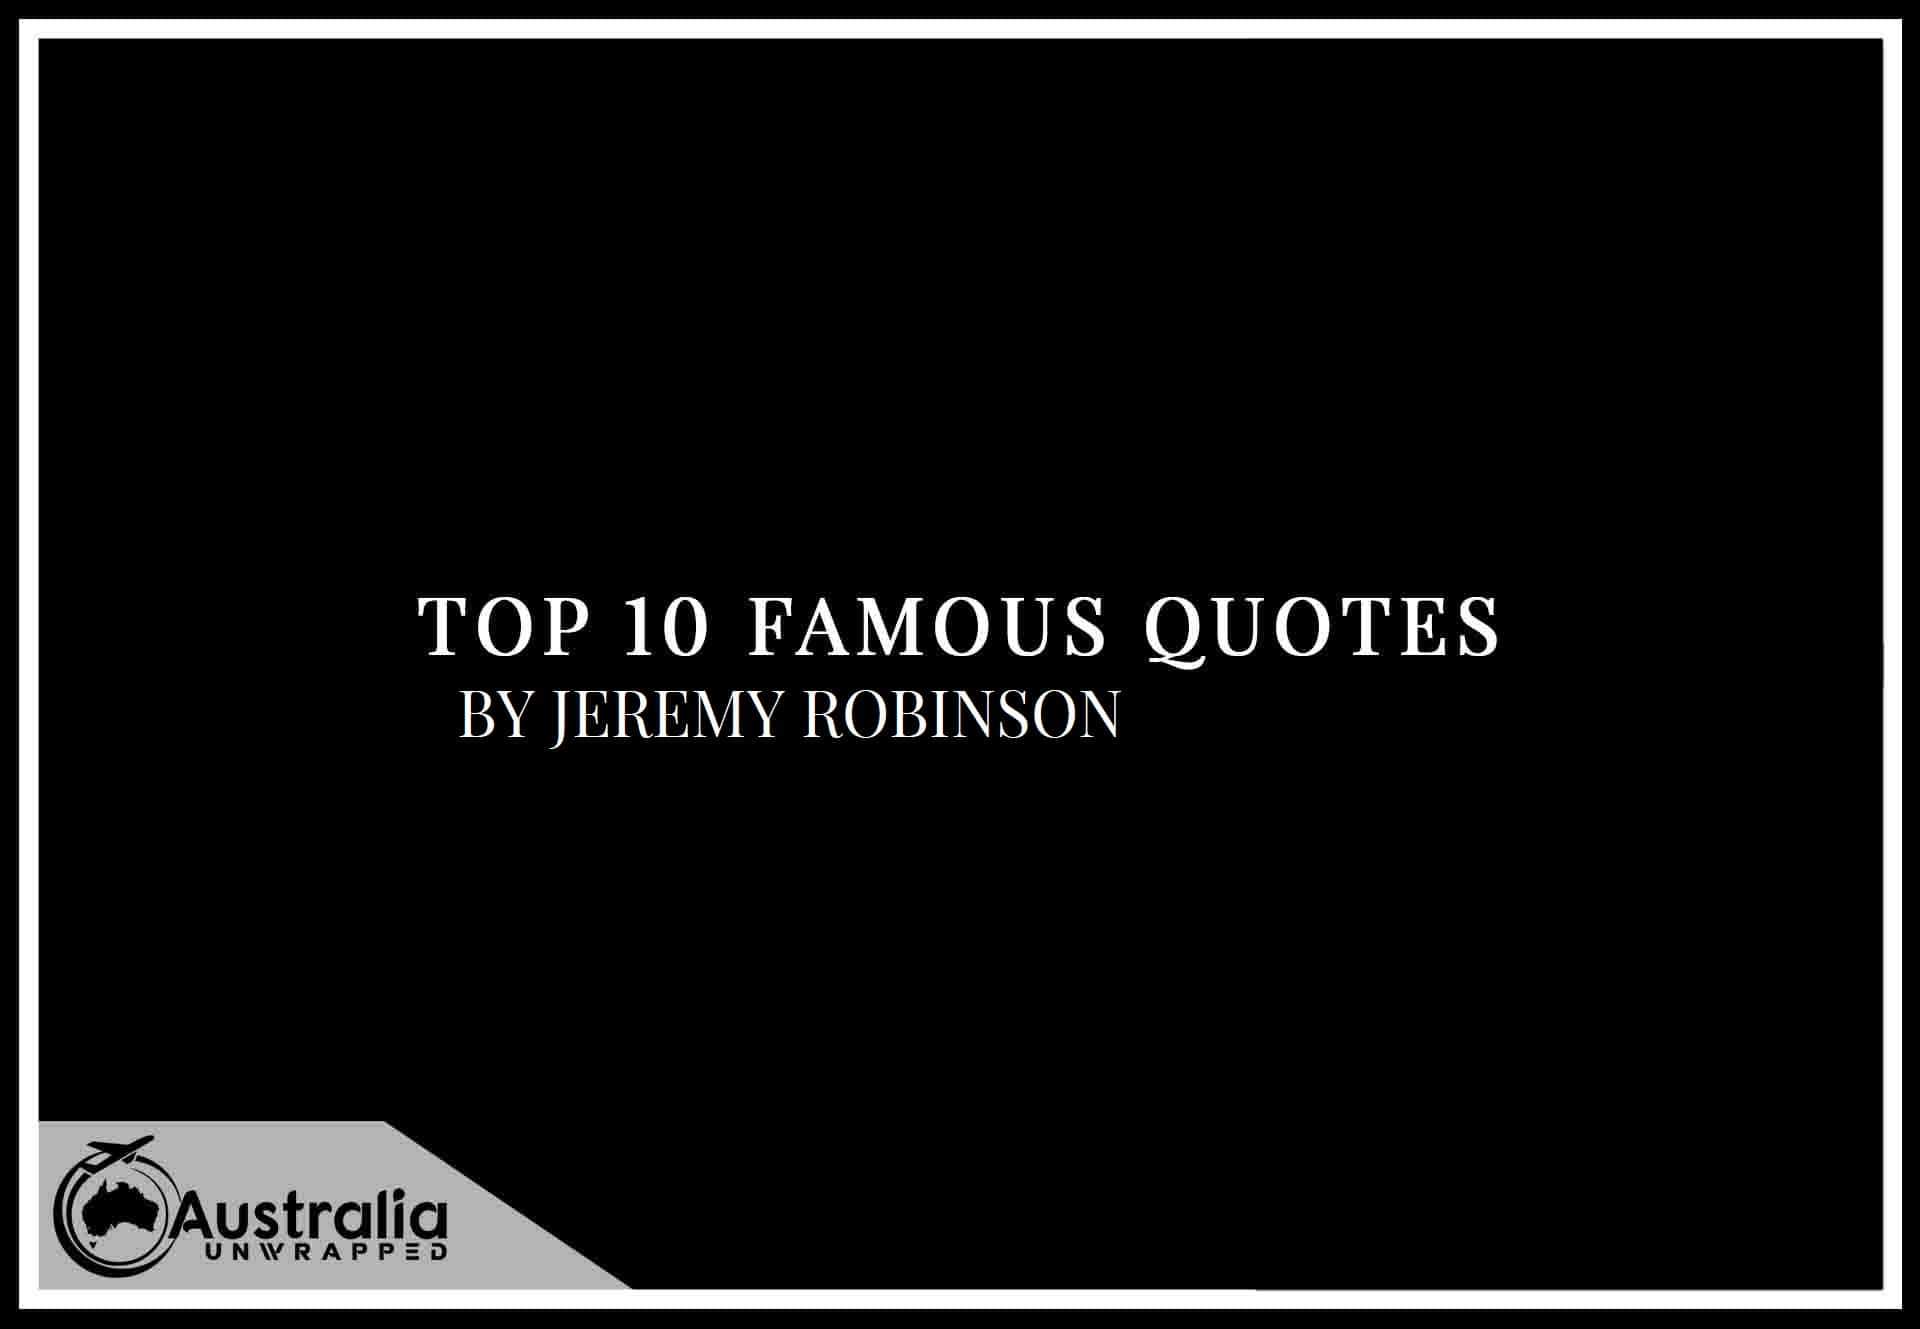 Top 10 Famous Quotes by Author Jeremy Robinson